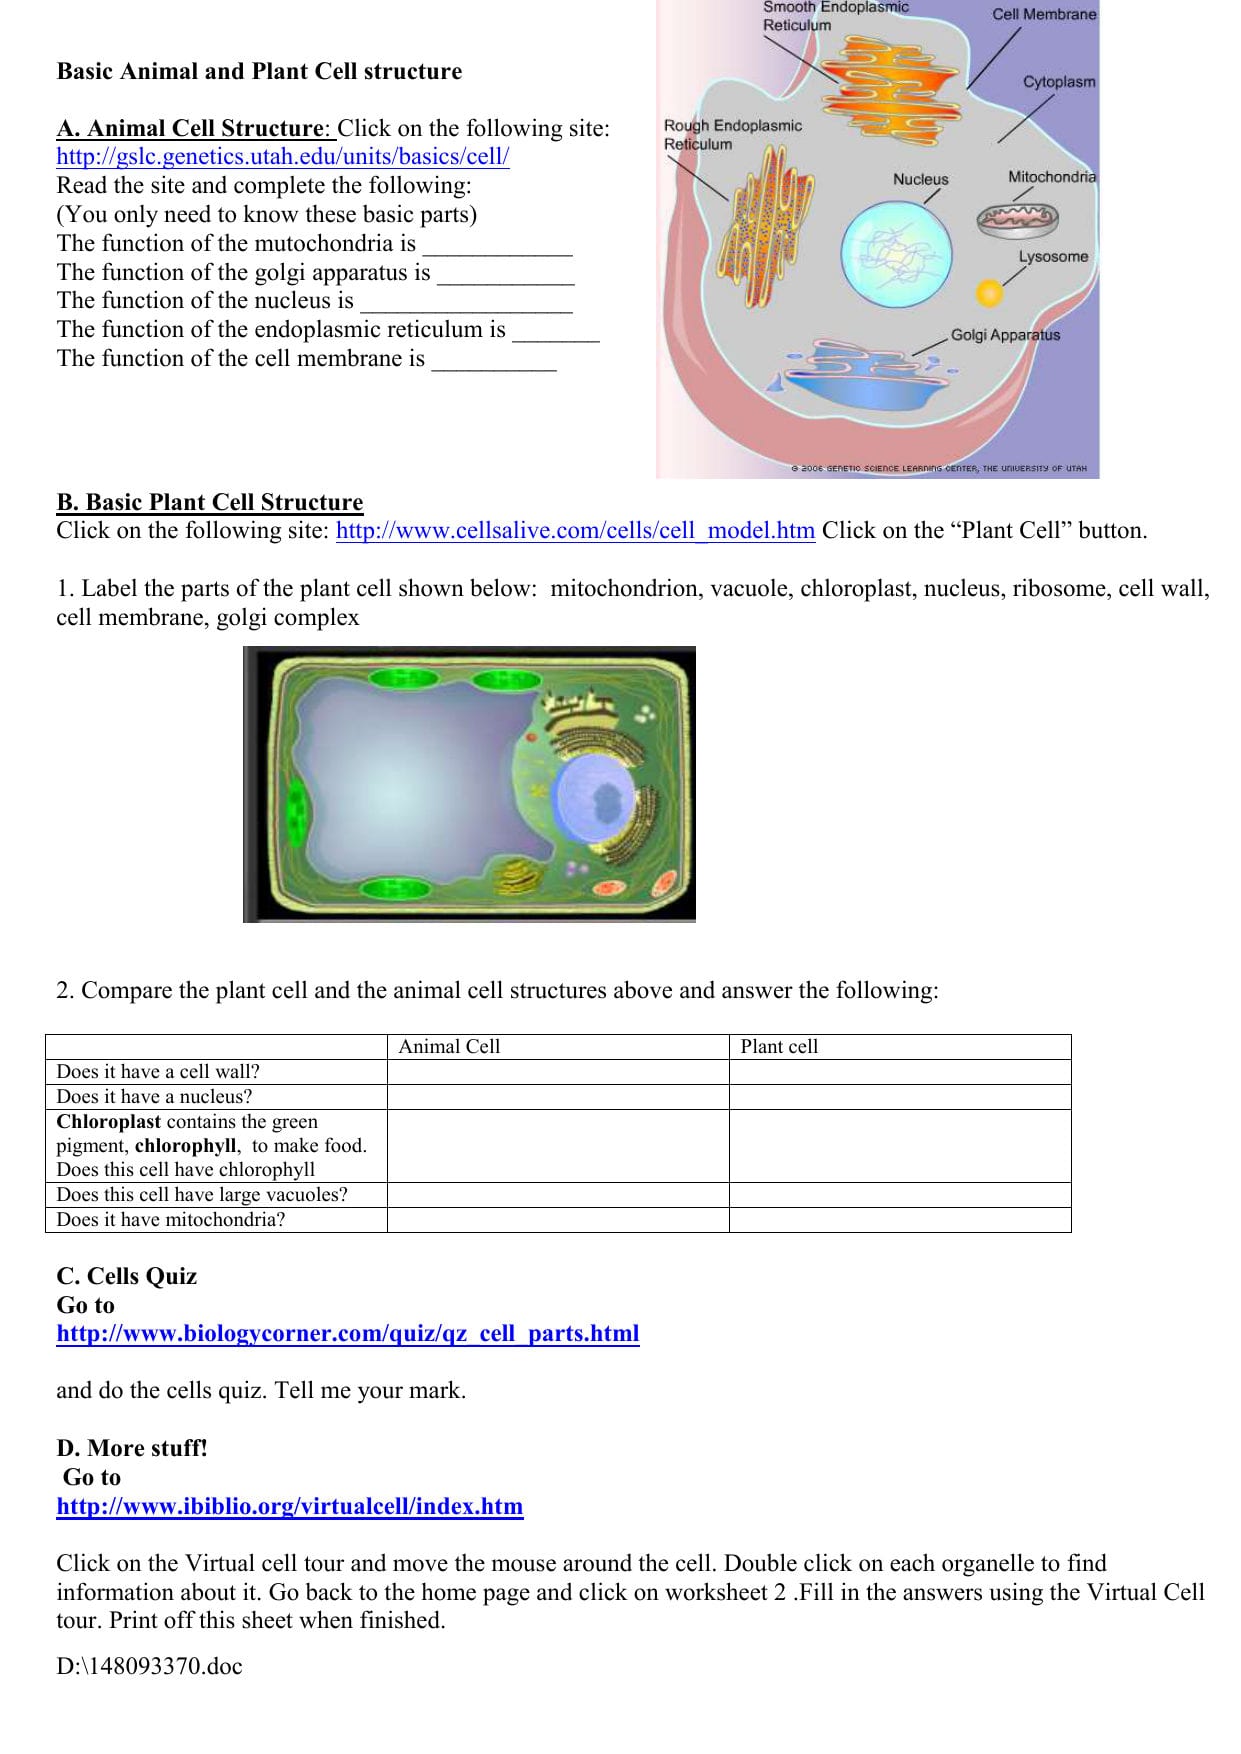 Basic Animal And Plant Cell Structure